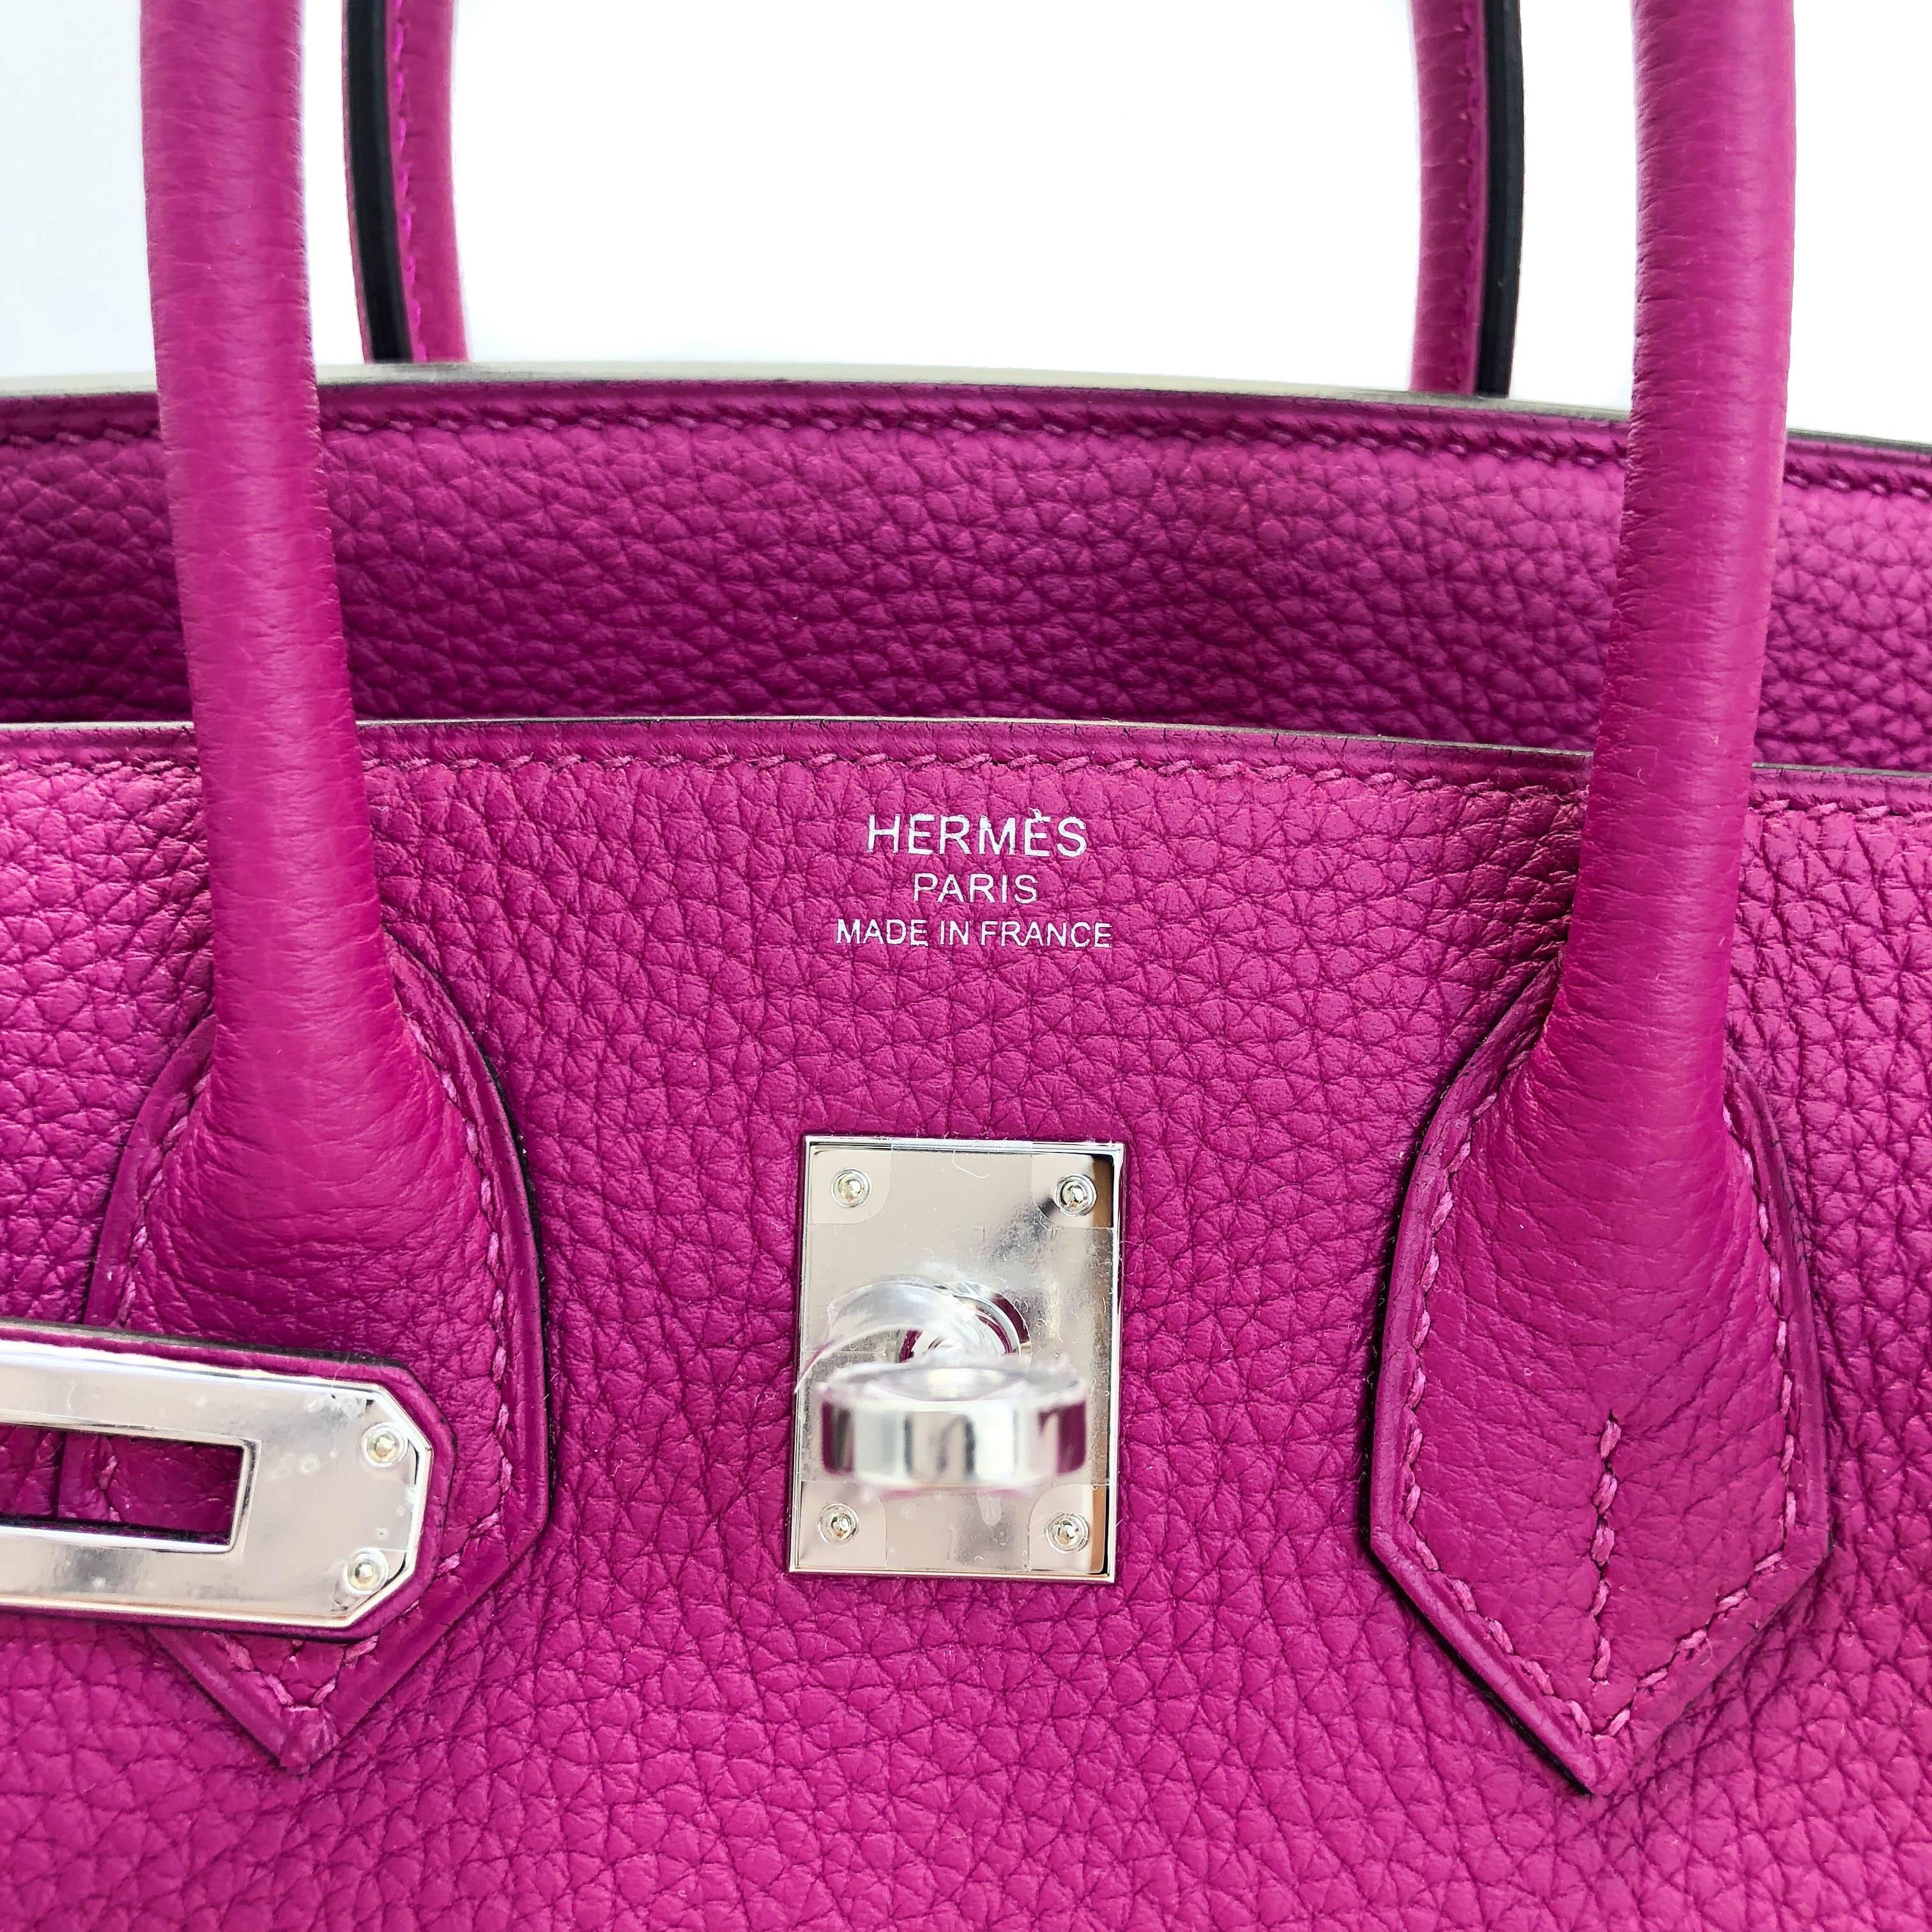 An iconic bag in an unforgettable colour. This Hermes This Birkin 25 Rouge Pourpre with Palladium Hardware is guaranteed to catch attention with its adorable size and classic construction. Guaranteed 100% authentic.

100% authentic: Birkin